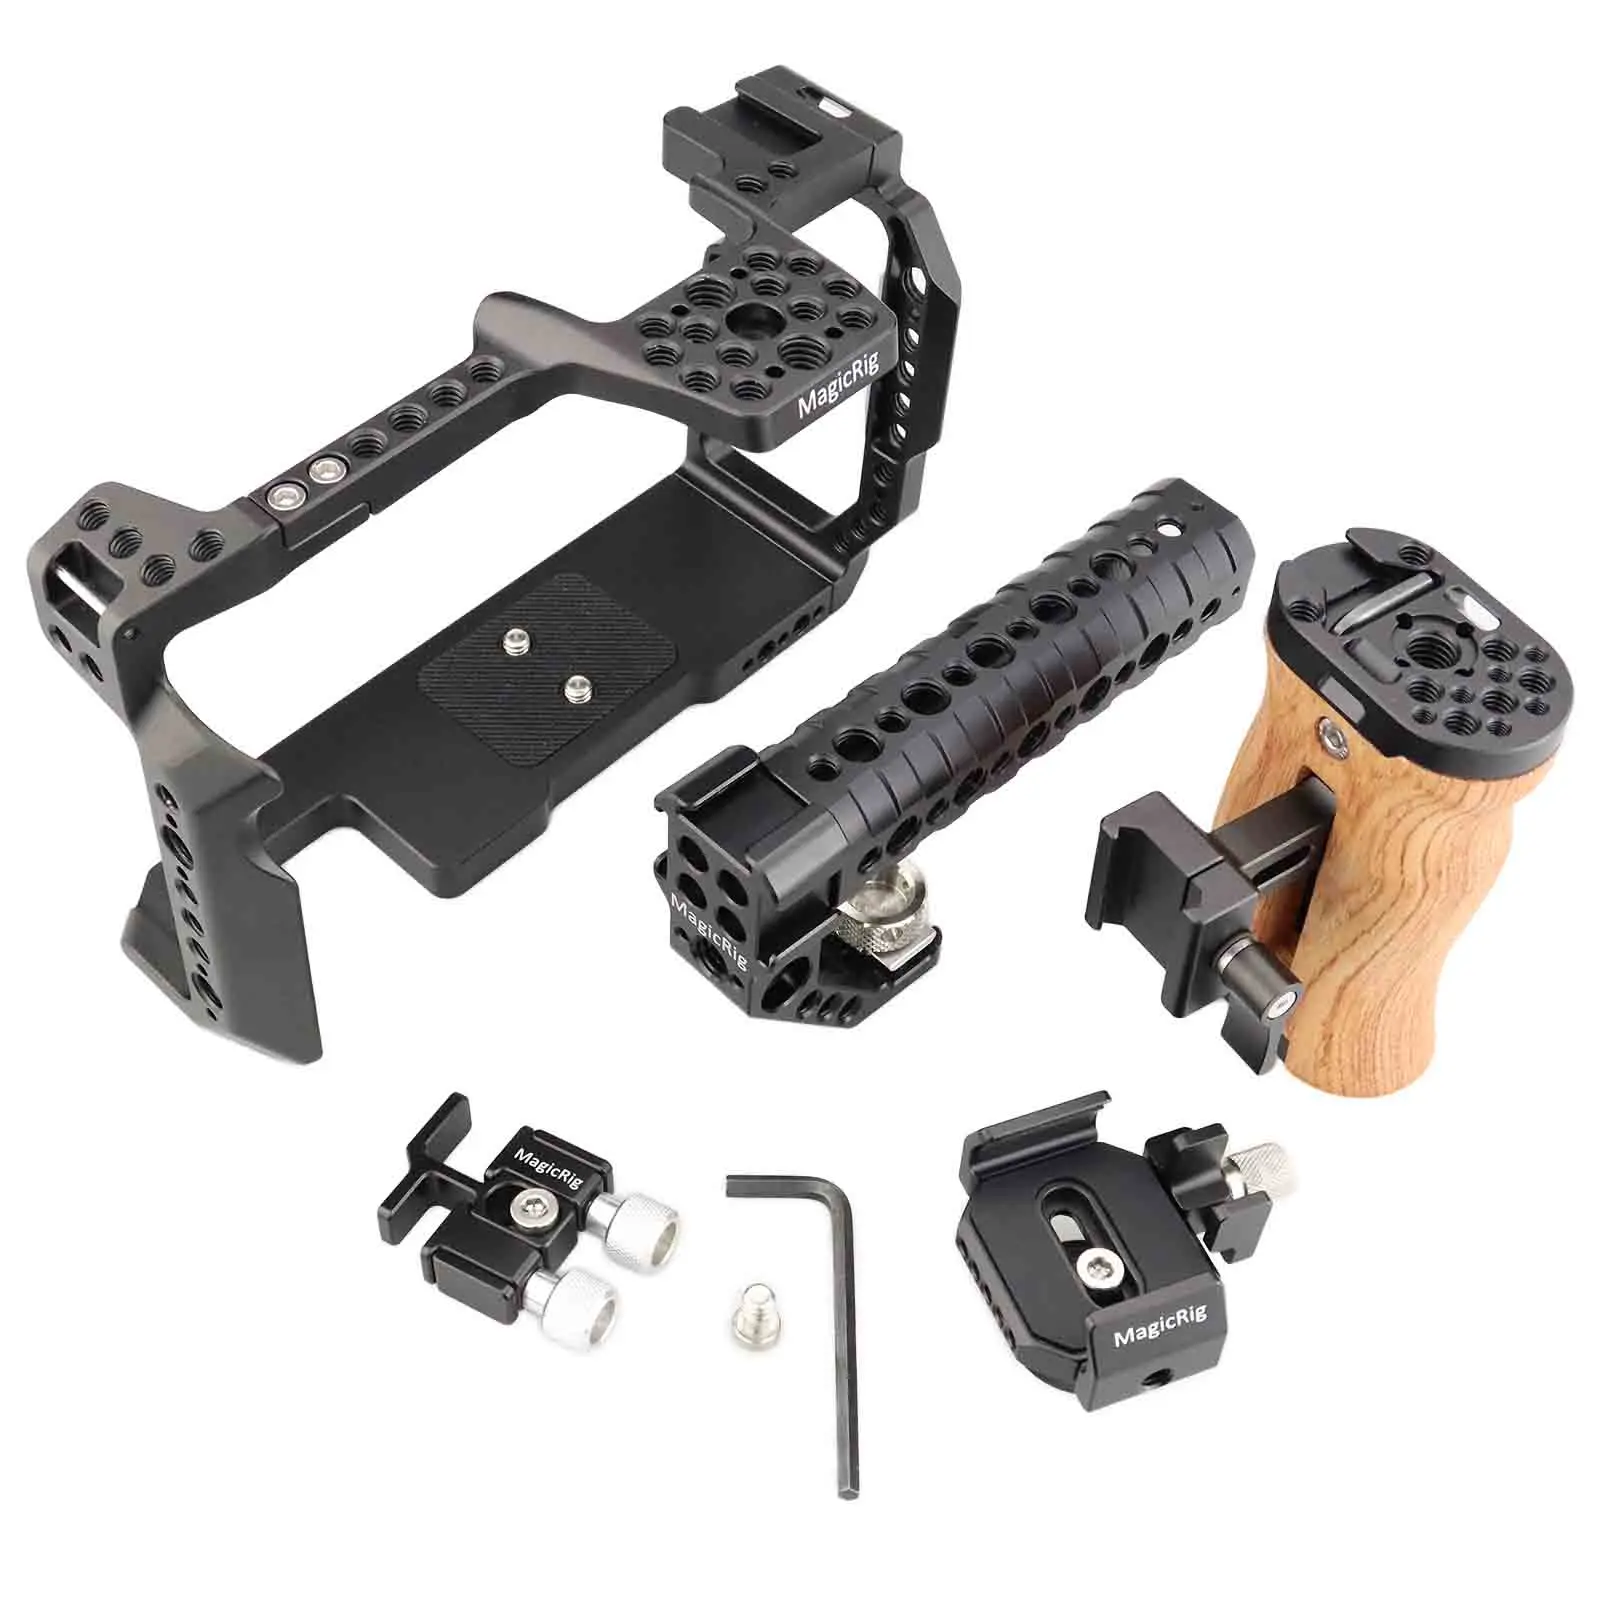 MAGICRIG Camera Cage Kit for BMPCC 6K Pro / 6K G2, with ARRI Top Handle, Camera Side Handle, T5/T7 SSD Holder , HDMI Cable Clamp enlarge